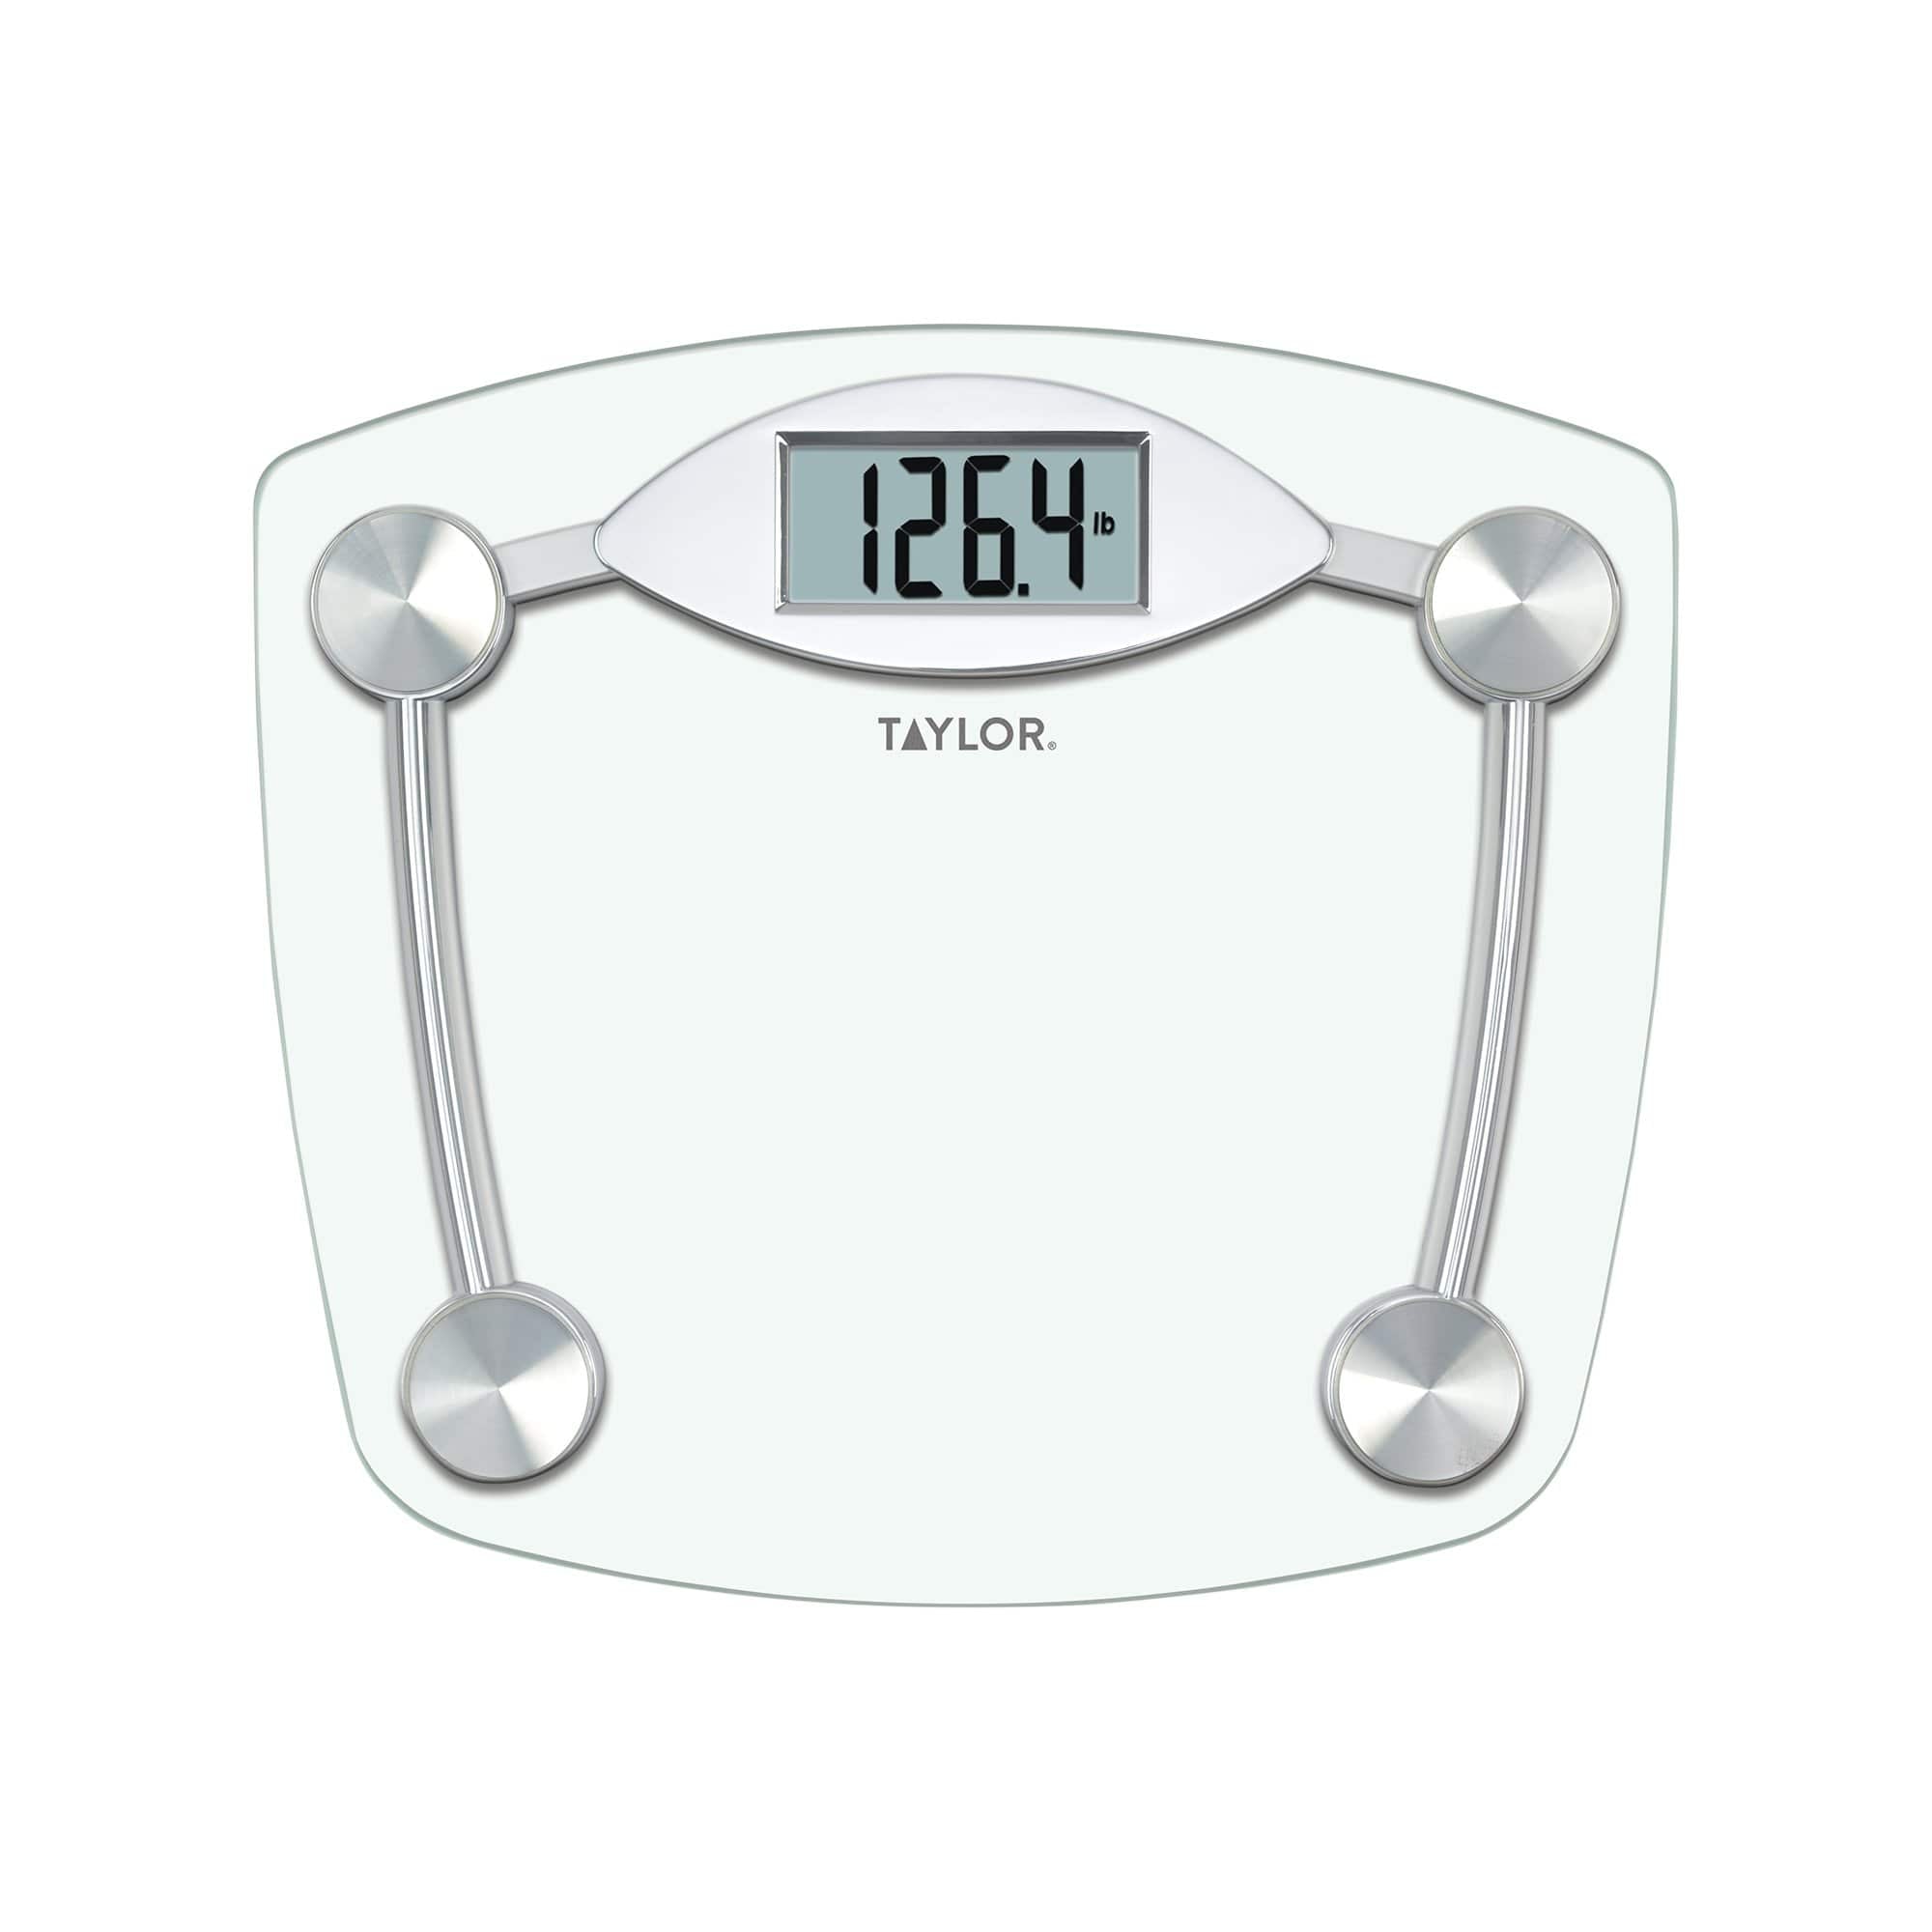 Digital Weight Scale Meat, Electronic Digital Scale